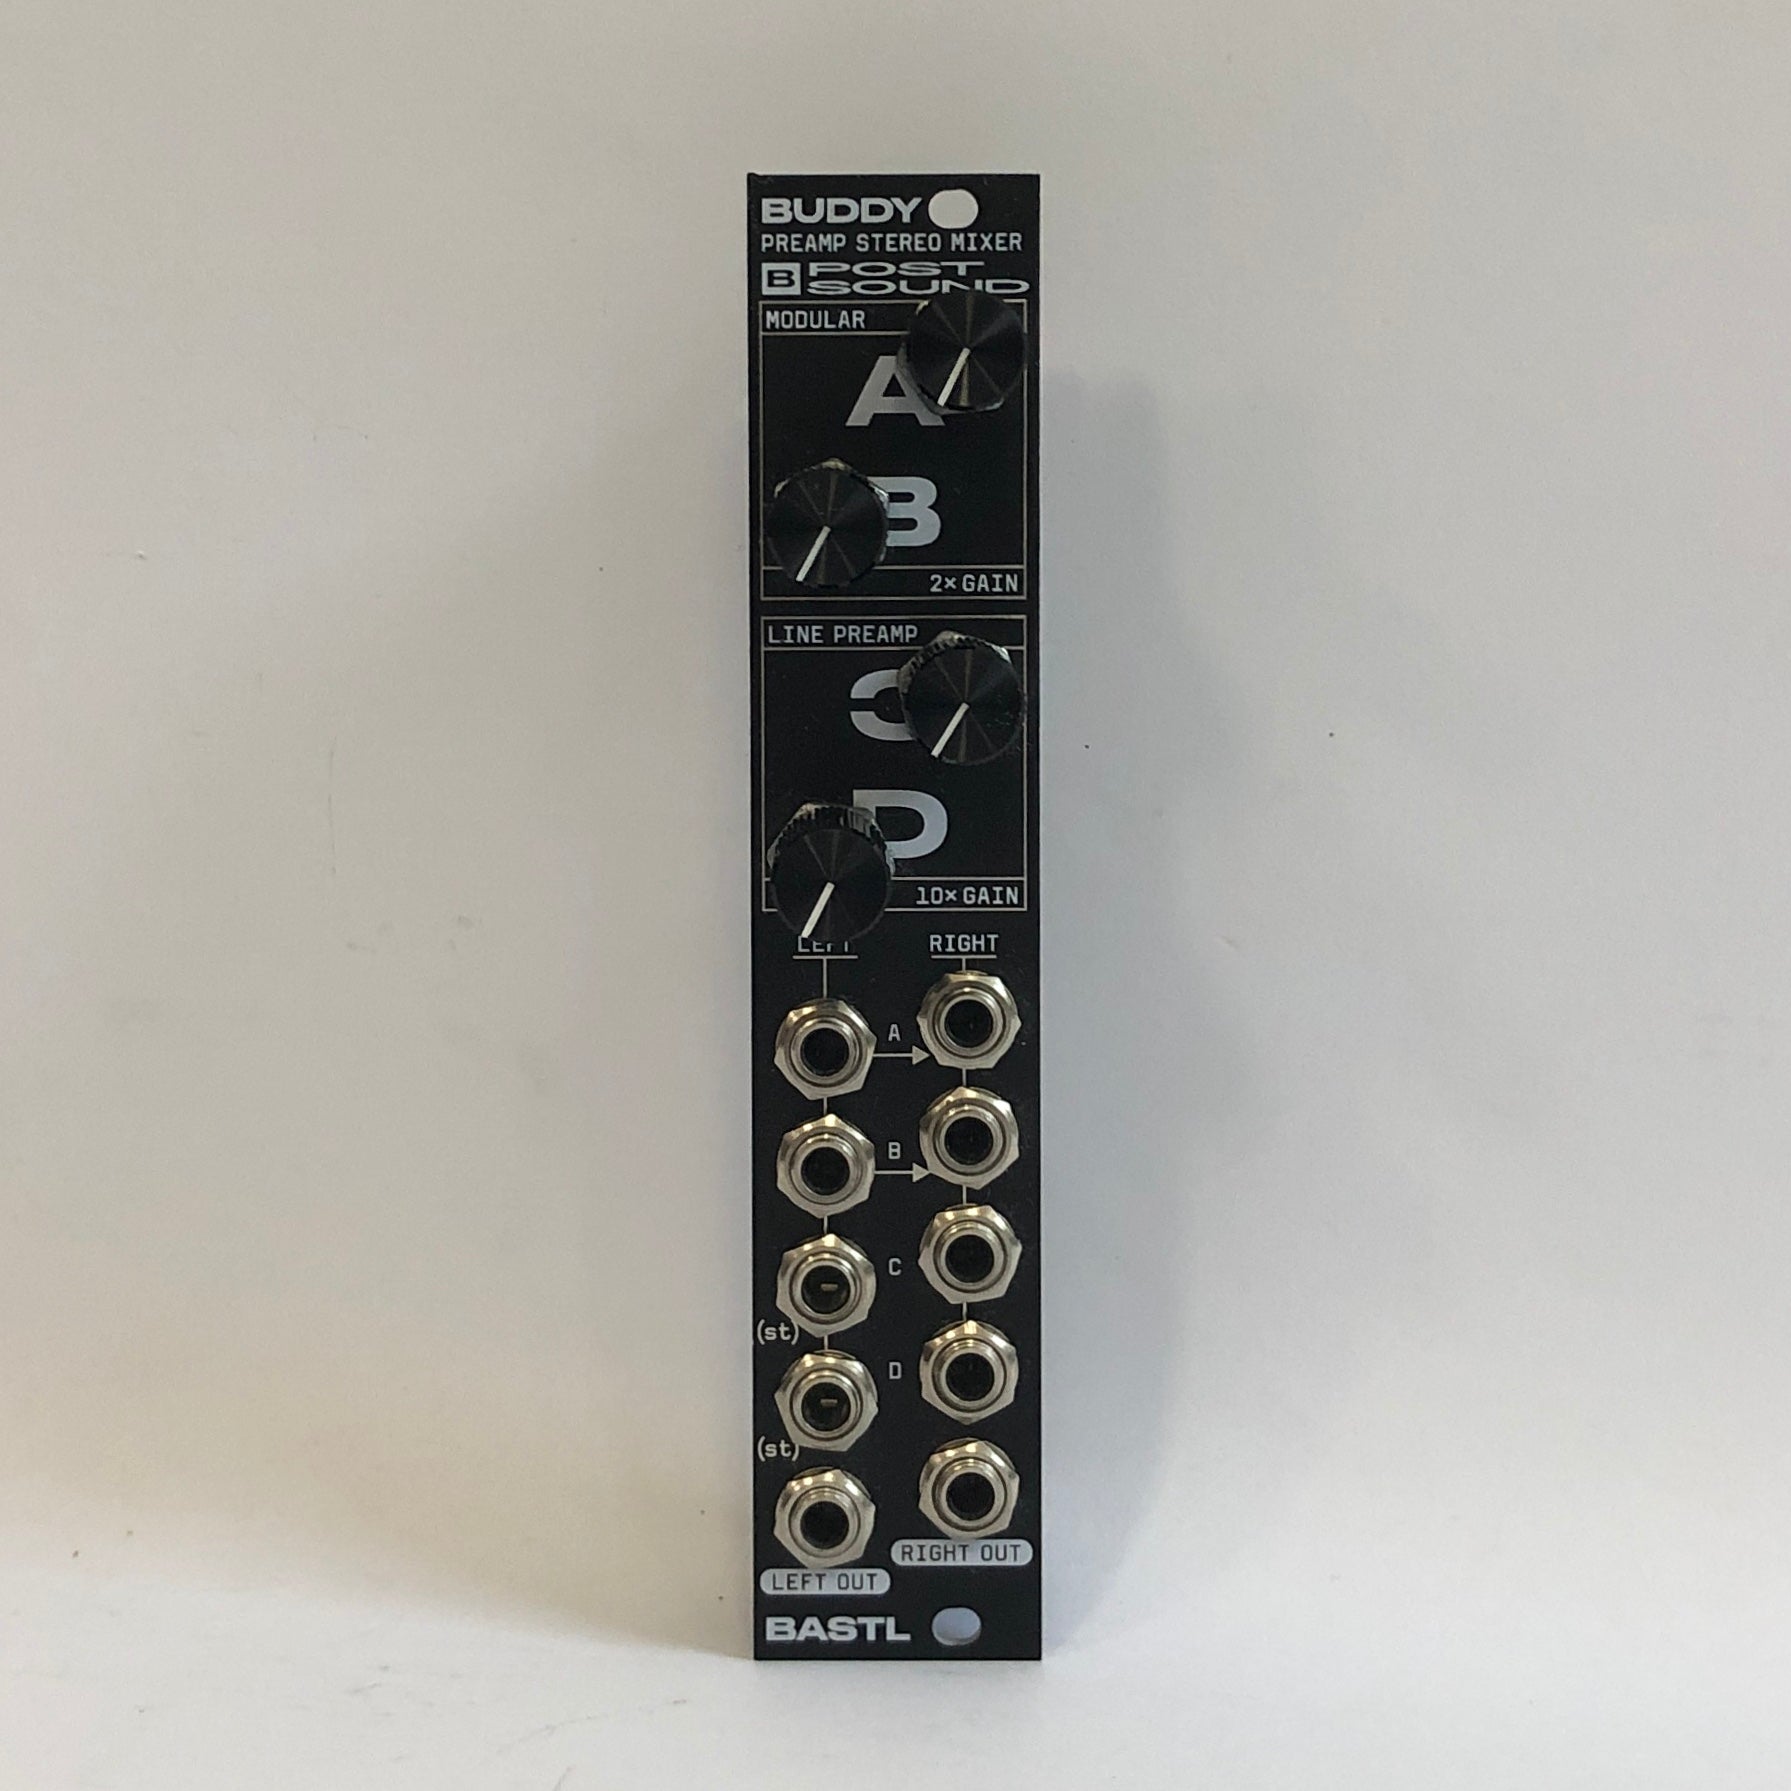 Bastl Instruments Buddy - Four Channel Stereo Mixer